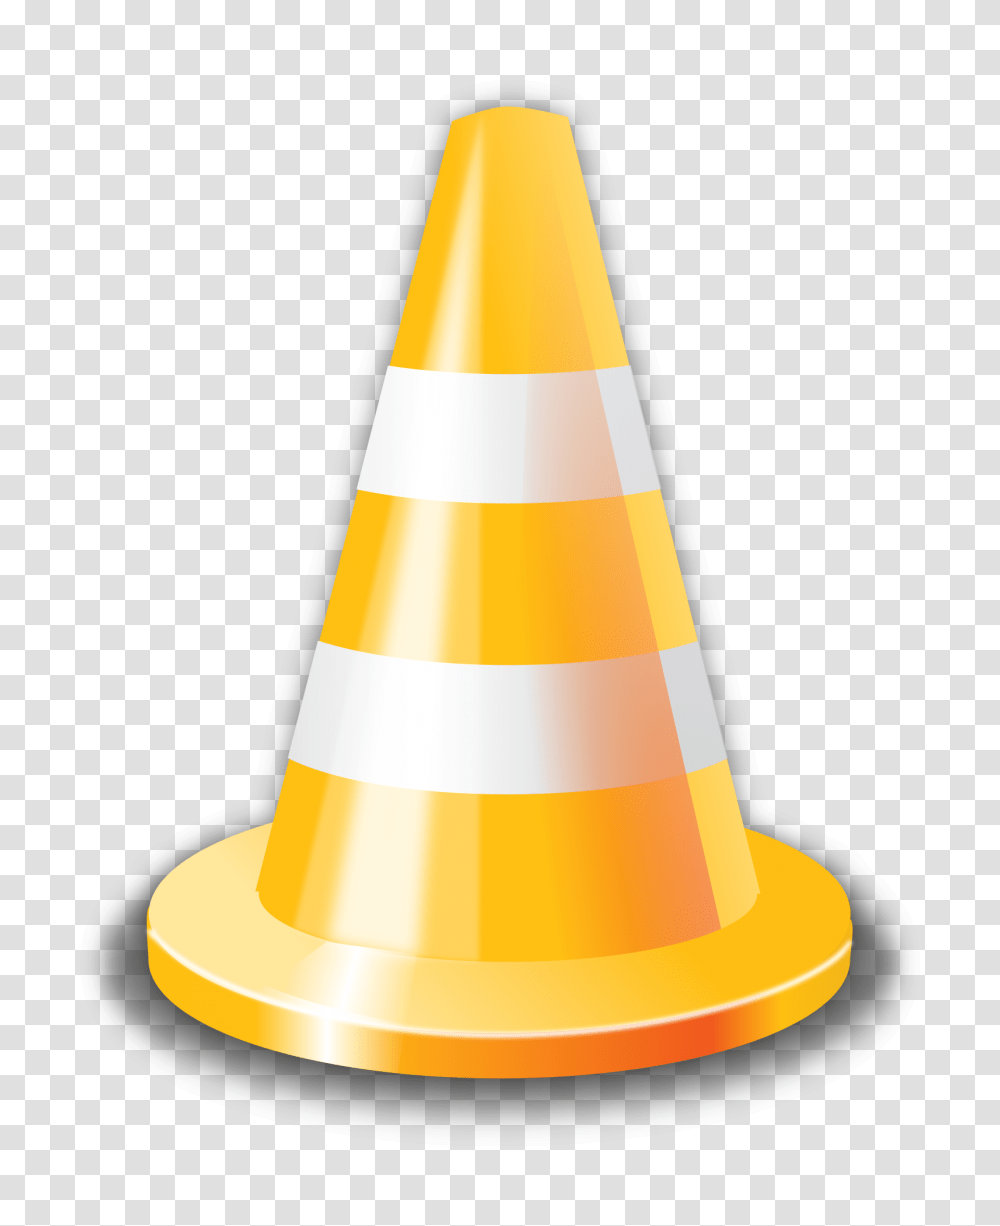 Road Cone With Orange And White Stripes Yellow Cone Clipart, Lamp Transparent Png